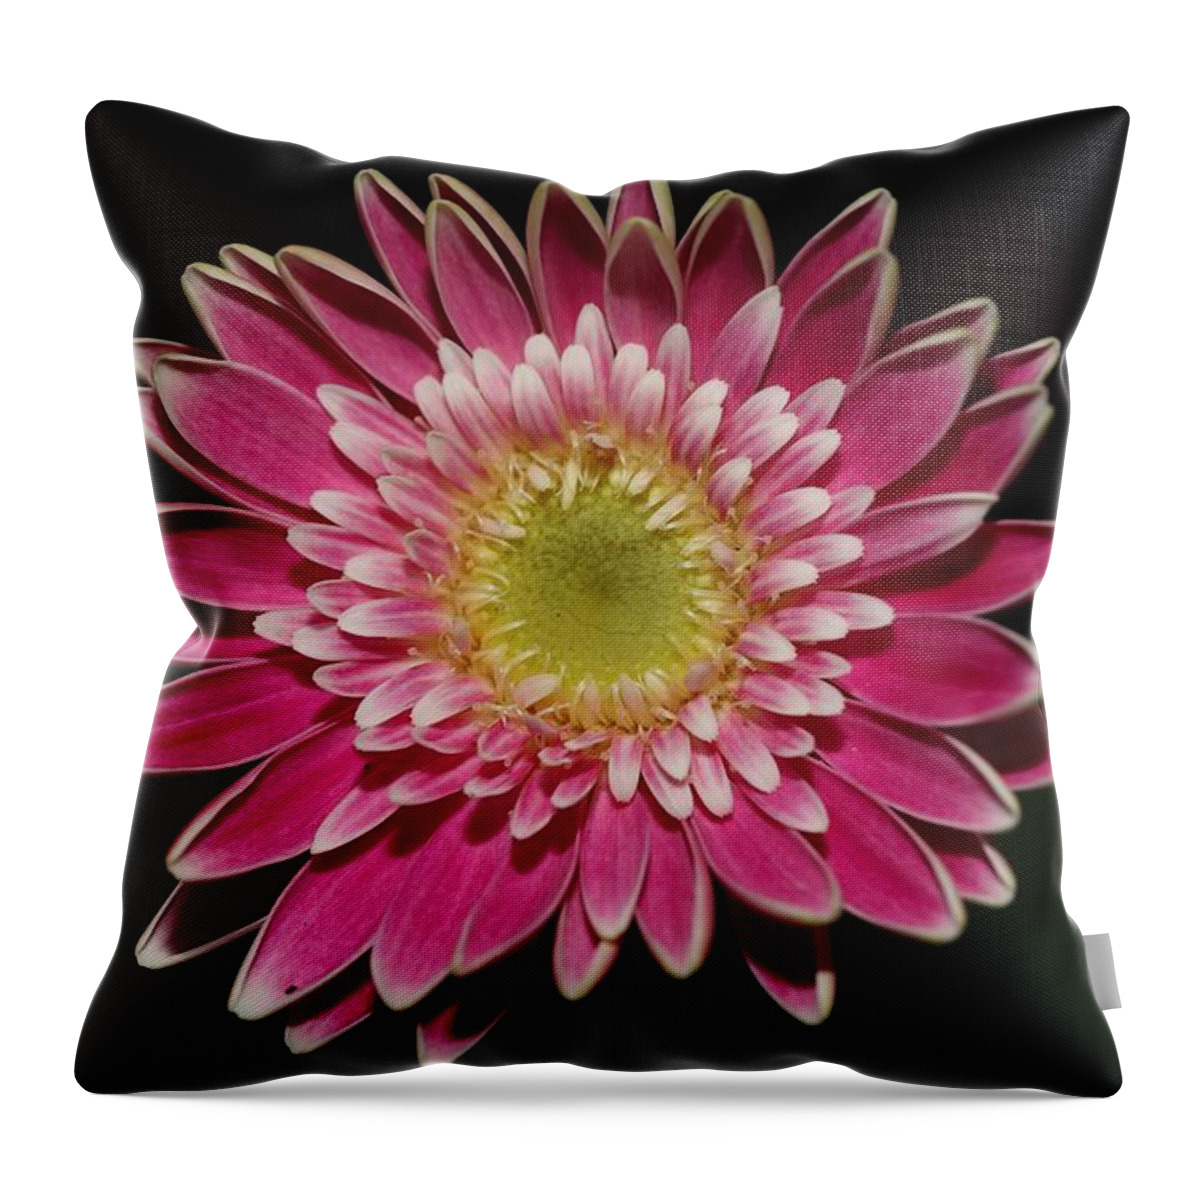 Daisy Throw Pillow featuring the photograph Pink Daisy by Mingming Jiang